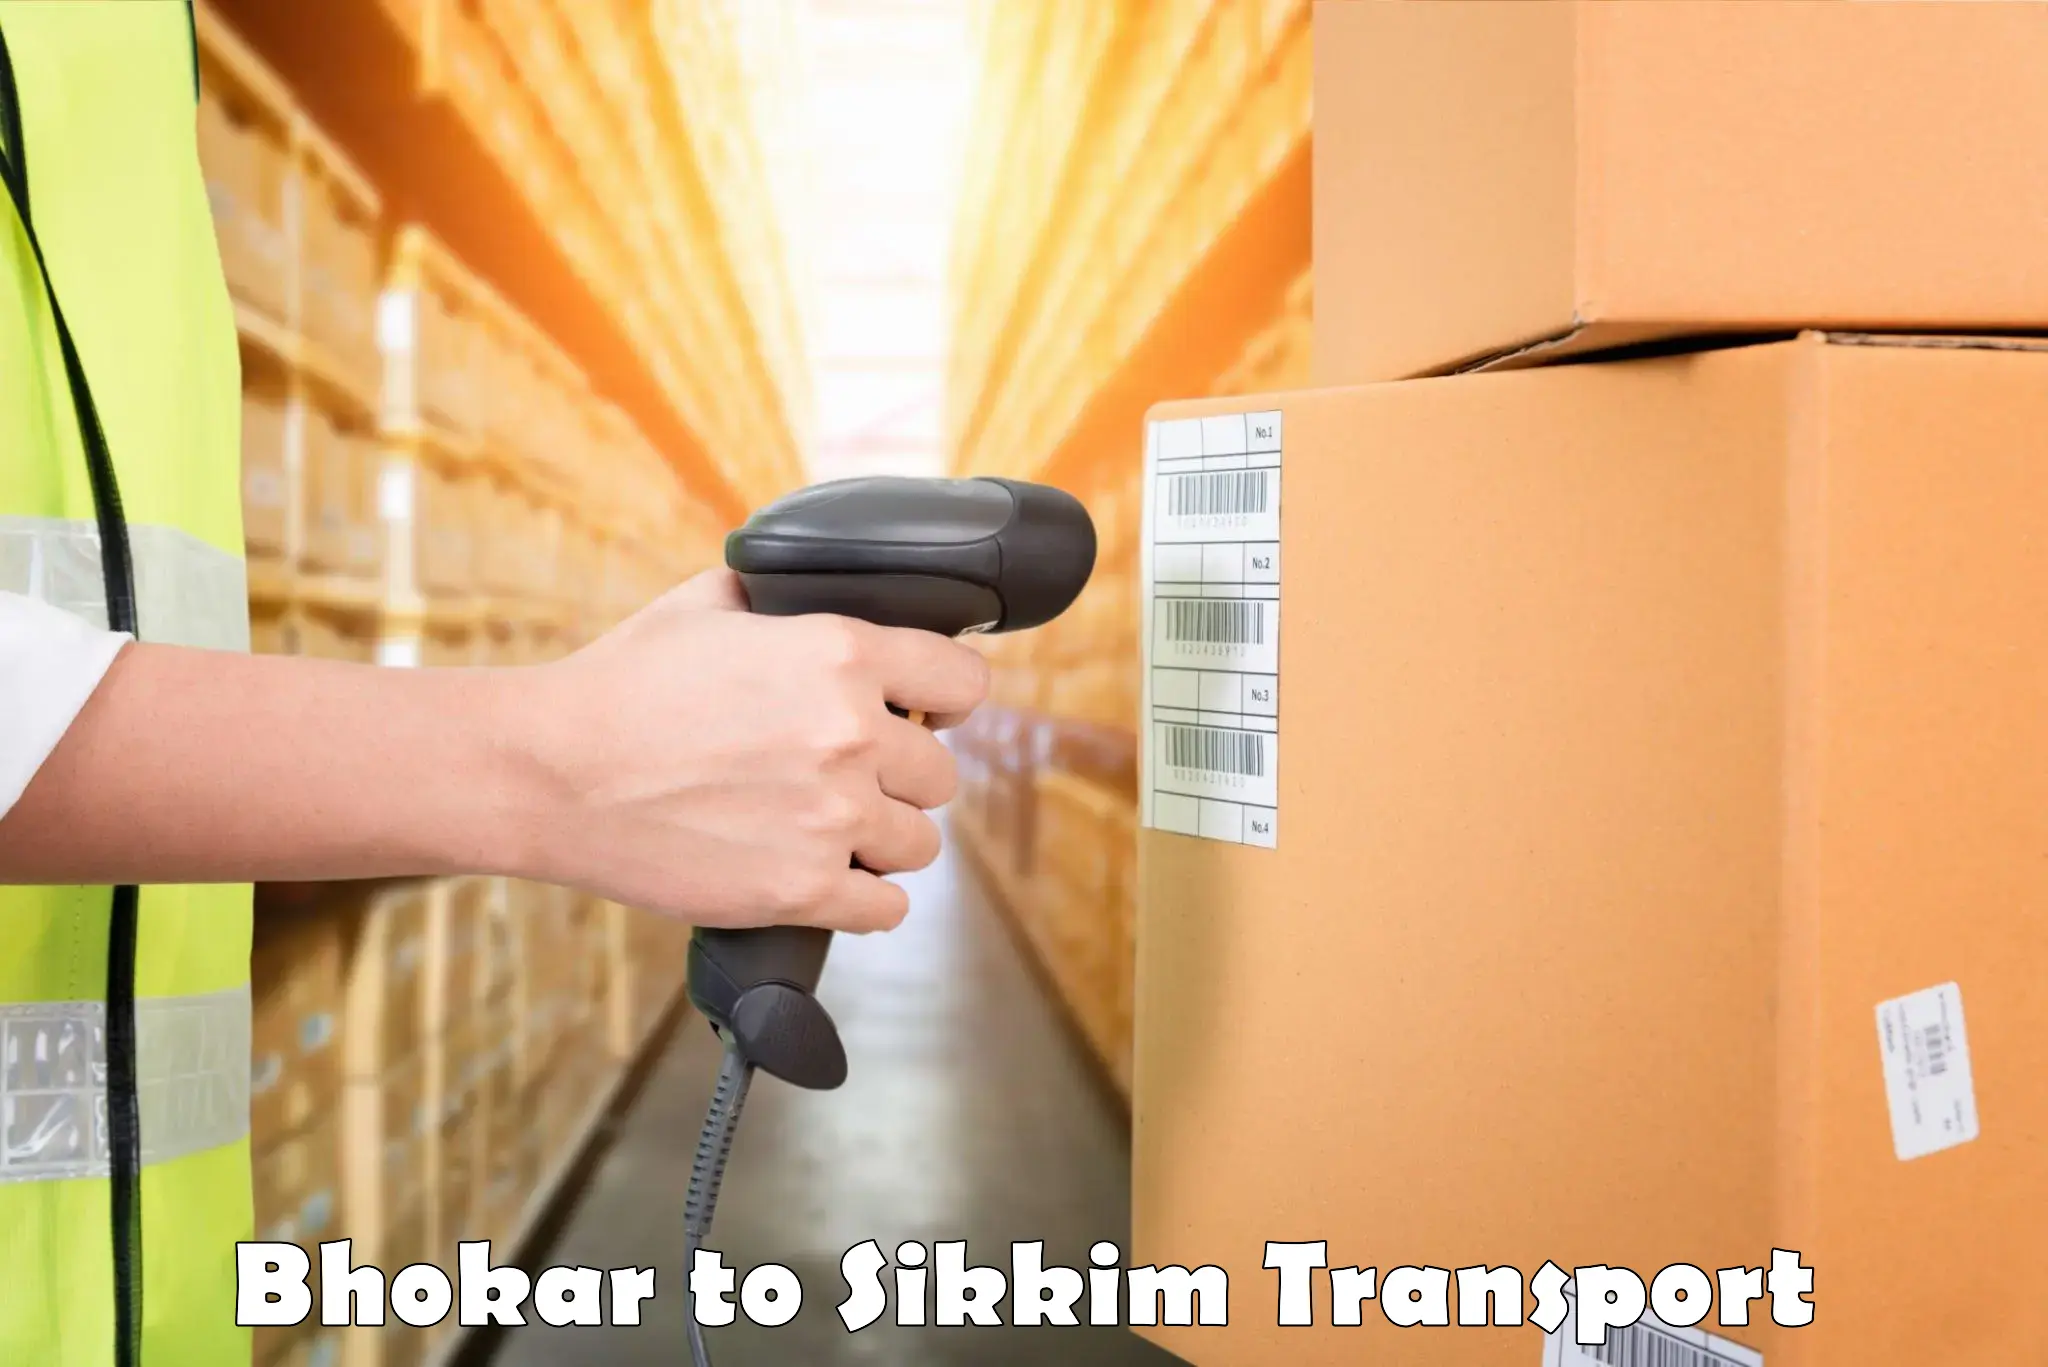 Goods delivery service Bhokar to Pelling